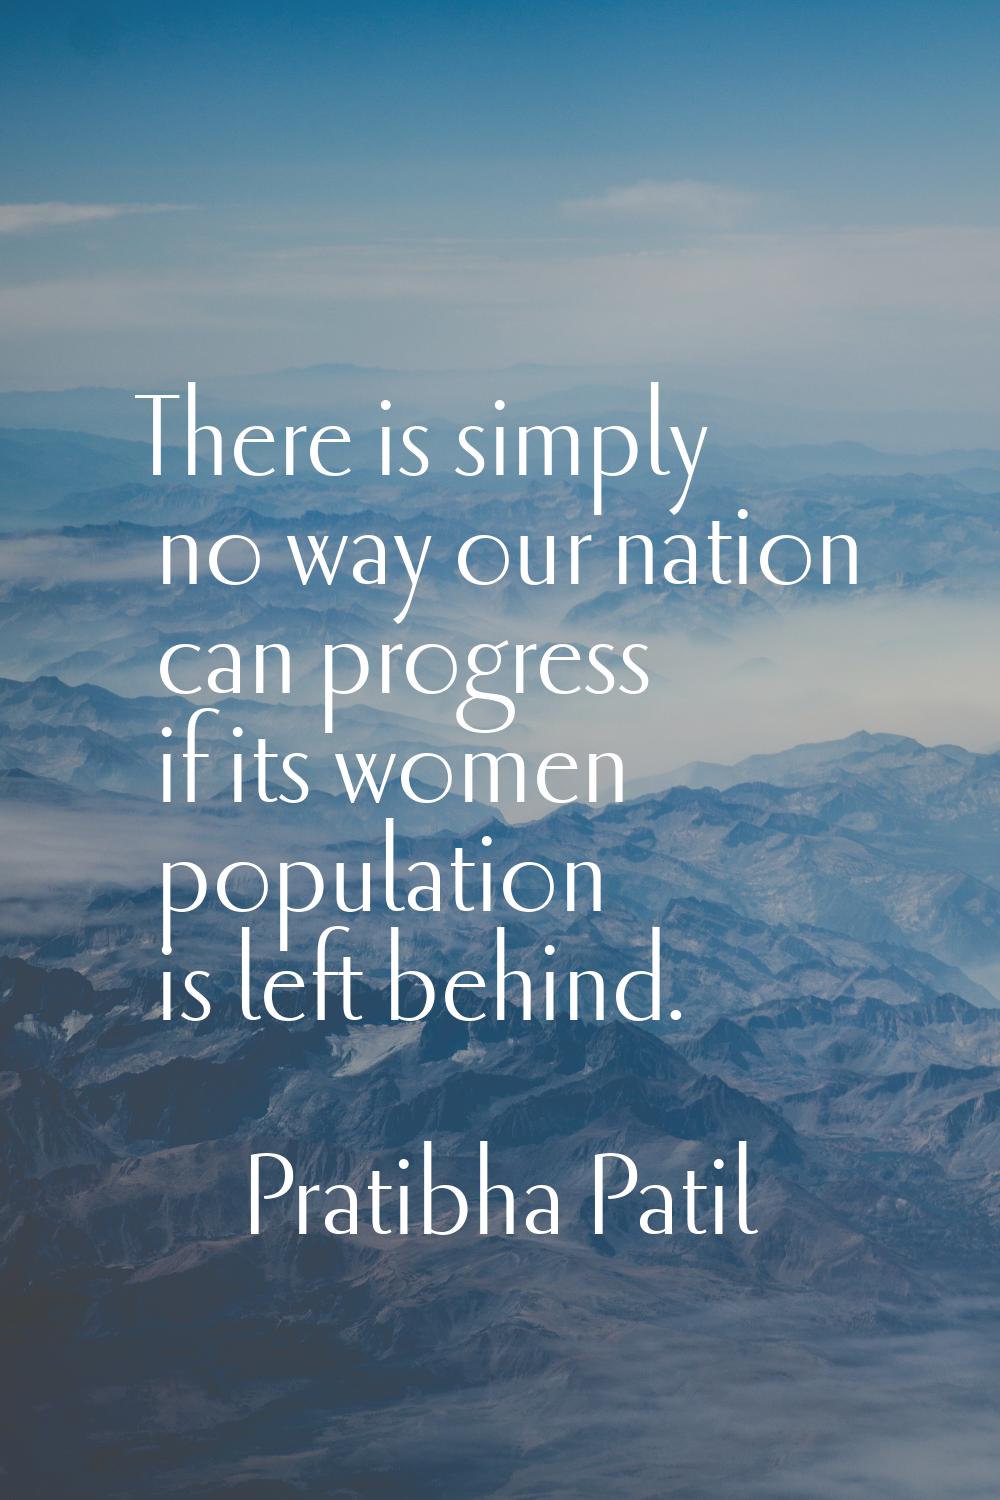 There is simply no way our nation can progress if its women population is left behind.